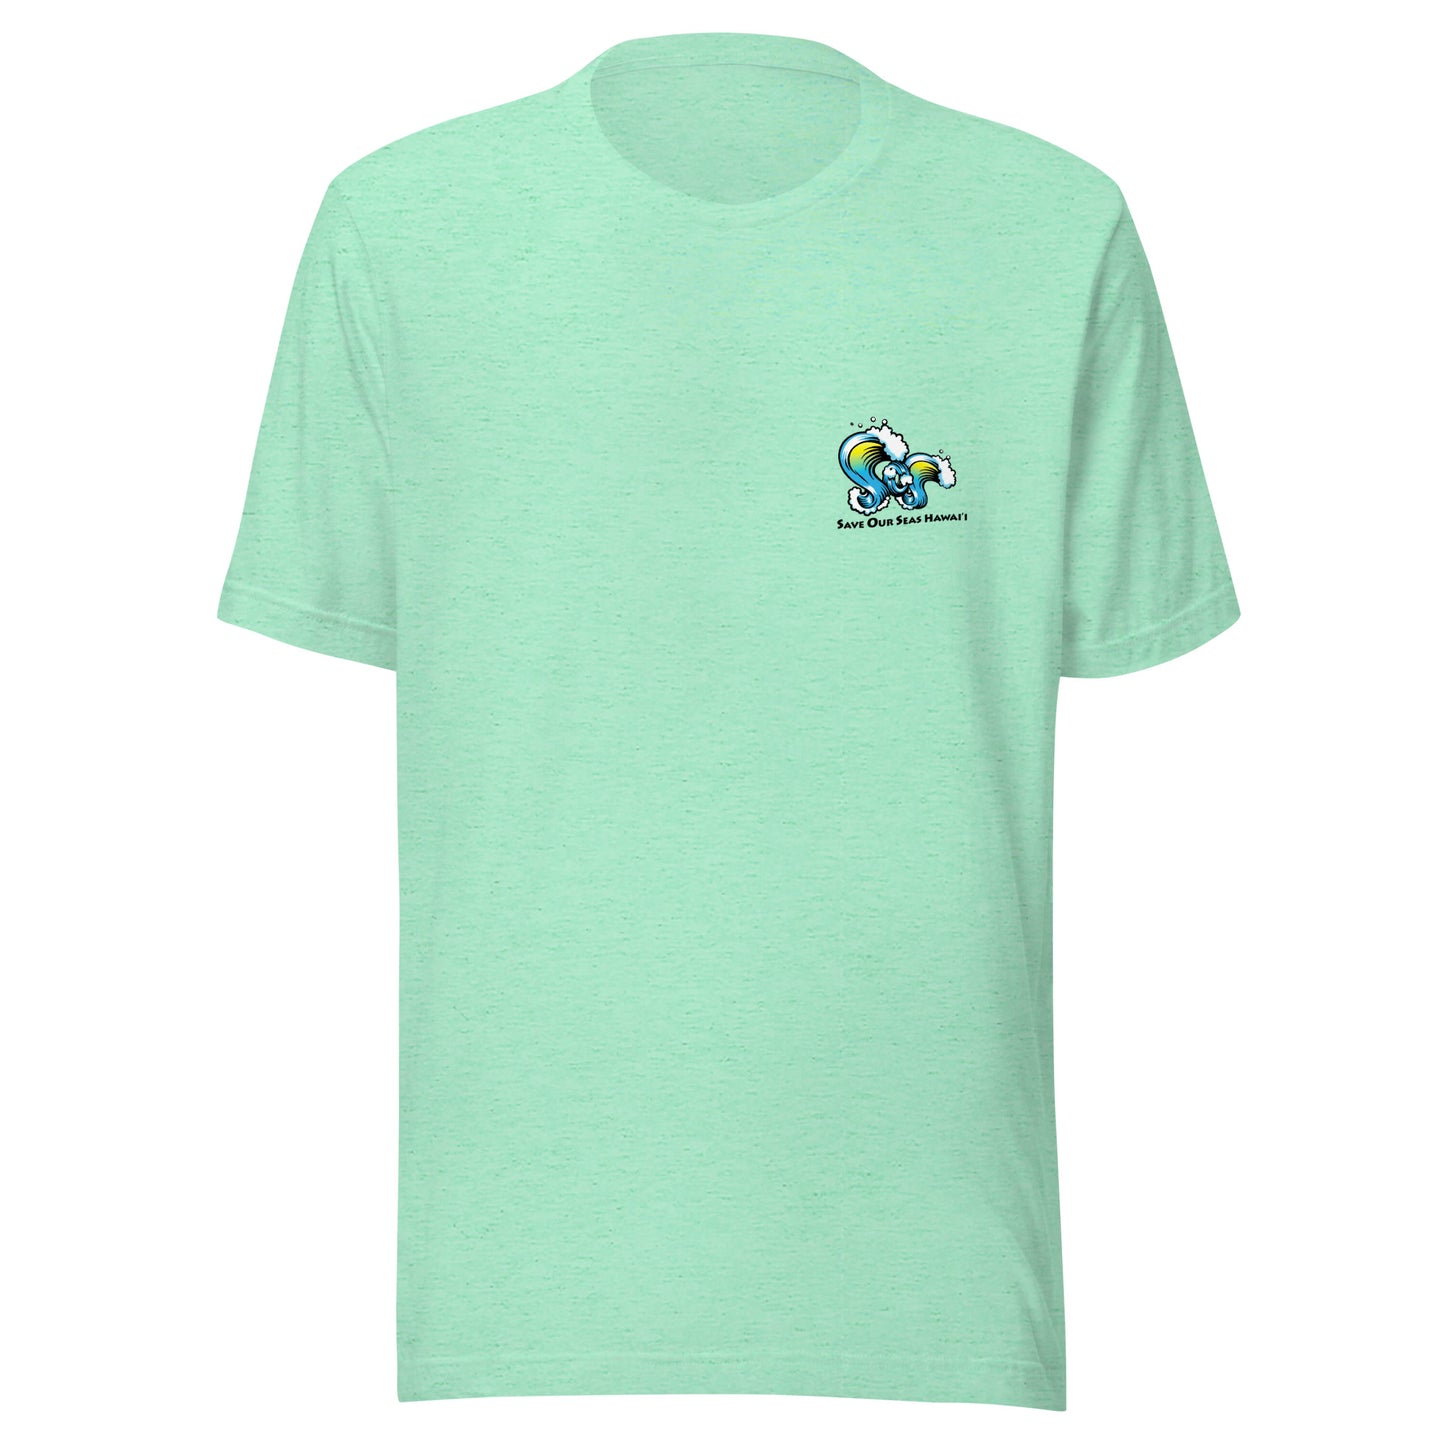 Save Our Seas Hawaii - SOS WAVES front -  Wahine Back -Unisex t-shirt